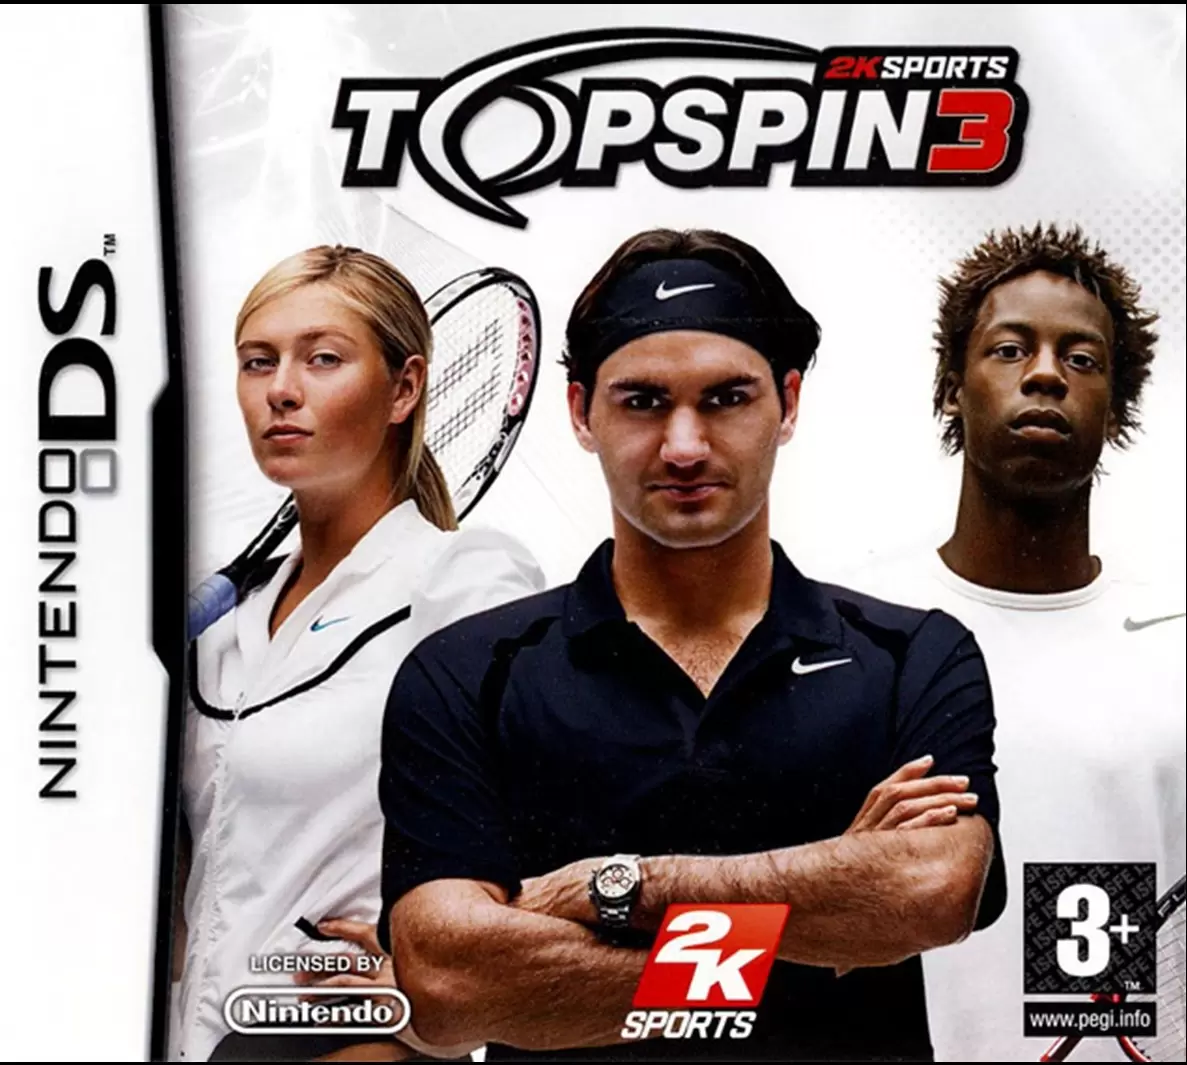 Nintendo DS Games - Top Spin 3